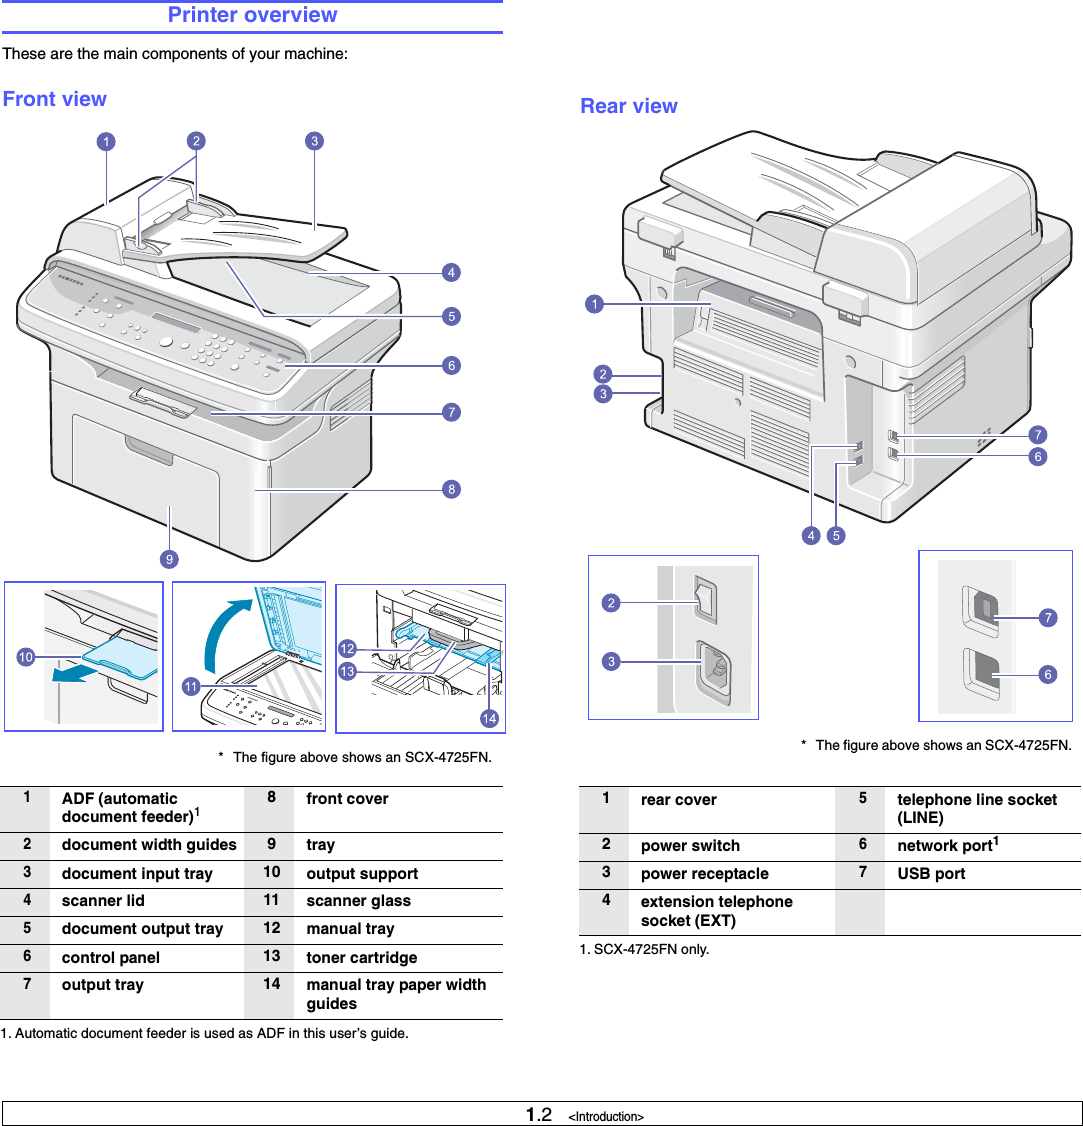 1.2   &lt;Introduction&gt;Printer overviewThese are the main components of your machine:Front view1ADF (automatic document feeder)11. Automatic document feeder is used as ADF in this user’s guide.8front cover2document width guides 9tray3document input tray 10 output support4scanner lid 11 scanner glass5document output tray 12 manual tray6control panel 13 toner cartridge7output tray 14 manual tray paper width guides* The figure above shows an SCX-4725FN.Rear view1rear cover5telephone line socket(LINE)2power switch6network port11. SCX-4725FN only.3power receptacle7USB port4extension telephone socket (EXT)* The figure above shows an SCX-4725FN.